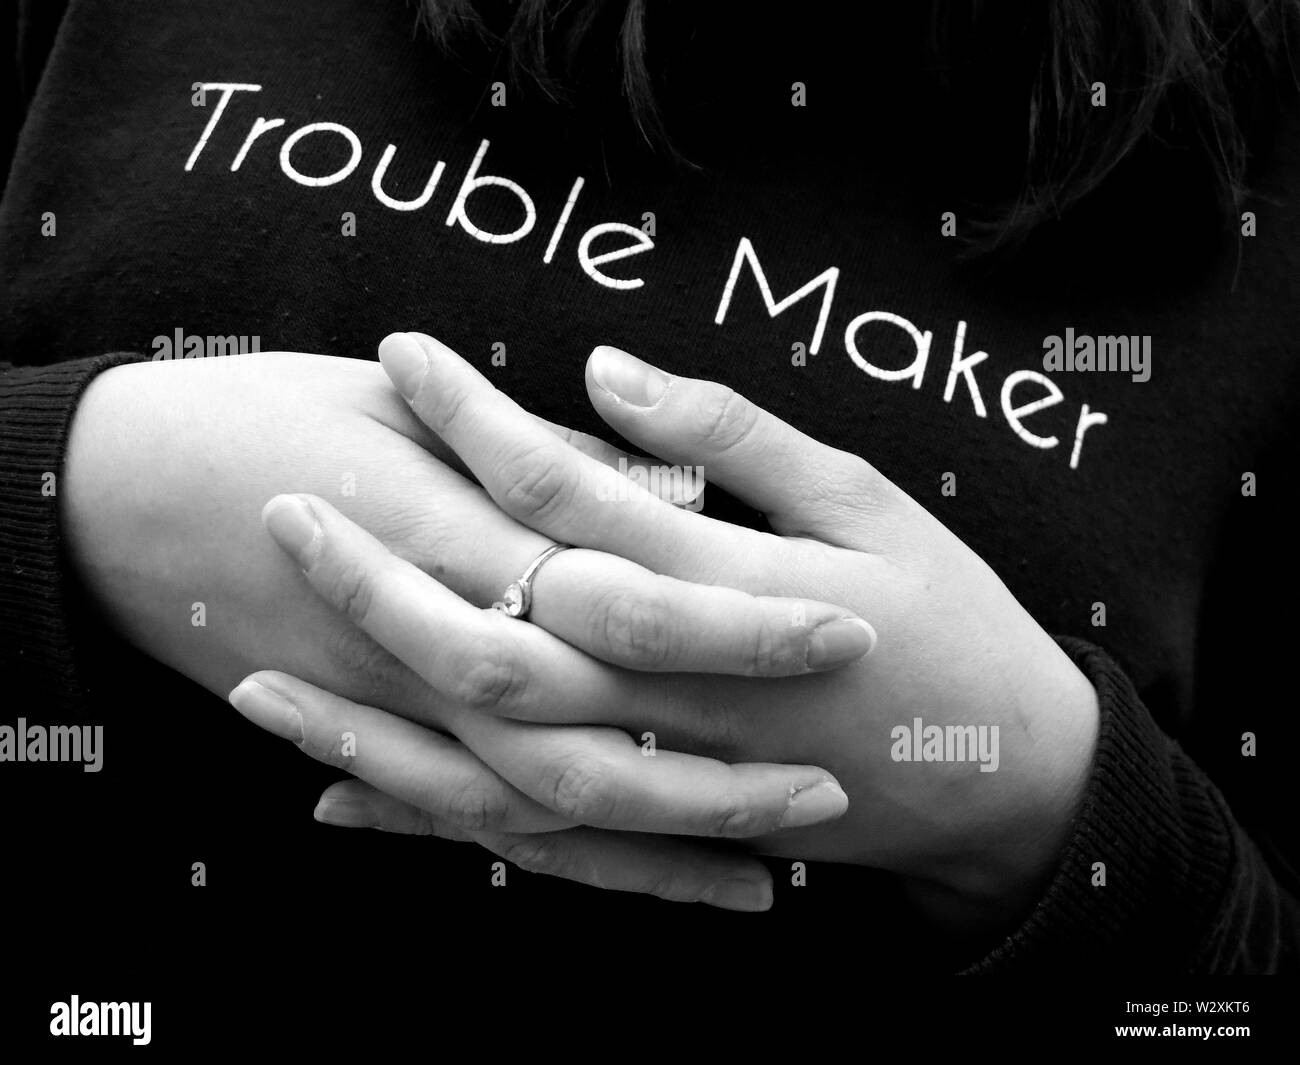 Teenaged girl with hands crossed wearing 'trouble maker' jumper. (Juxtaposition of feelings during adolescence). Stock Photo